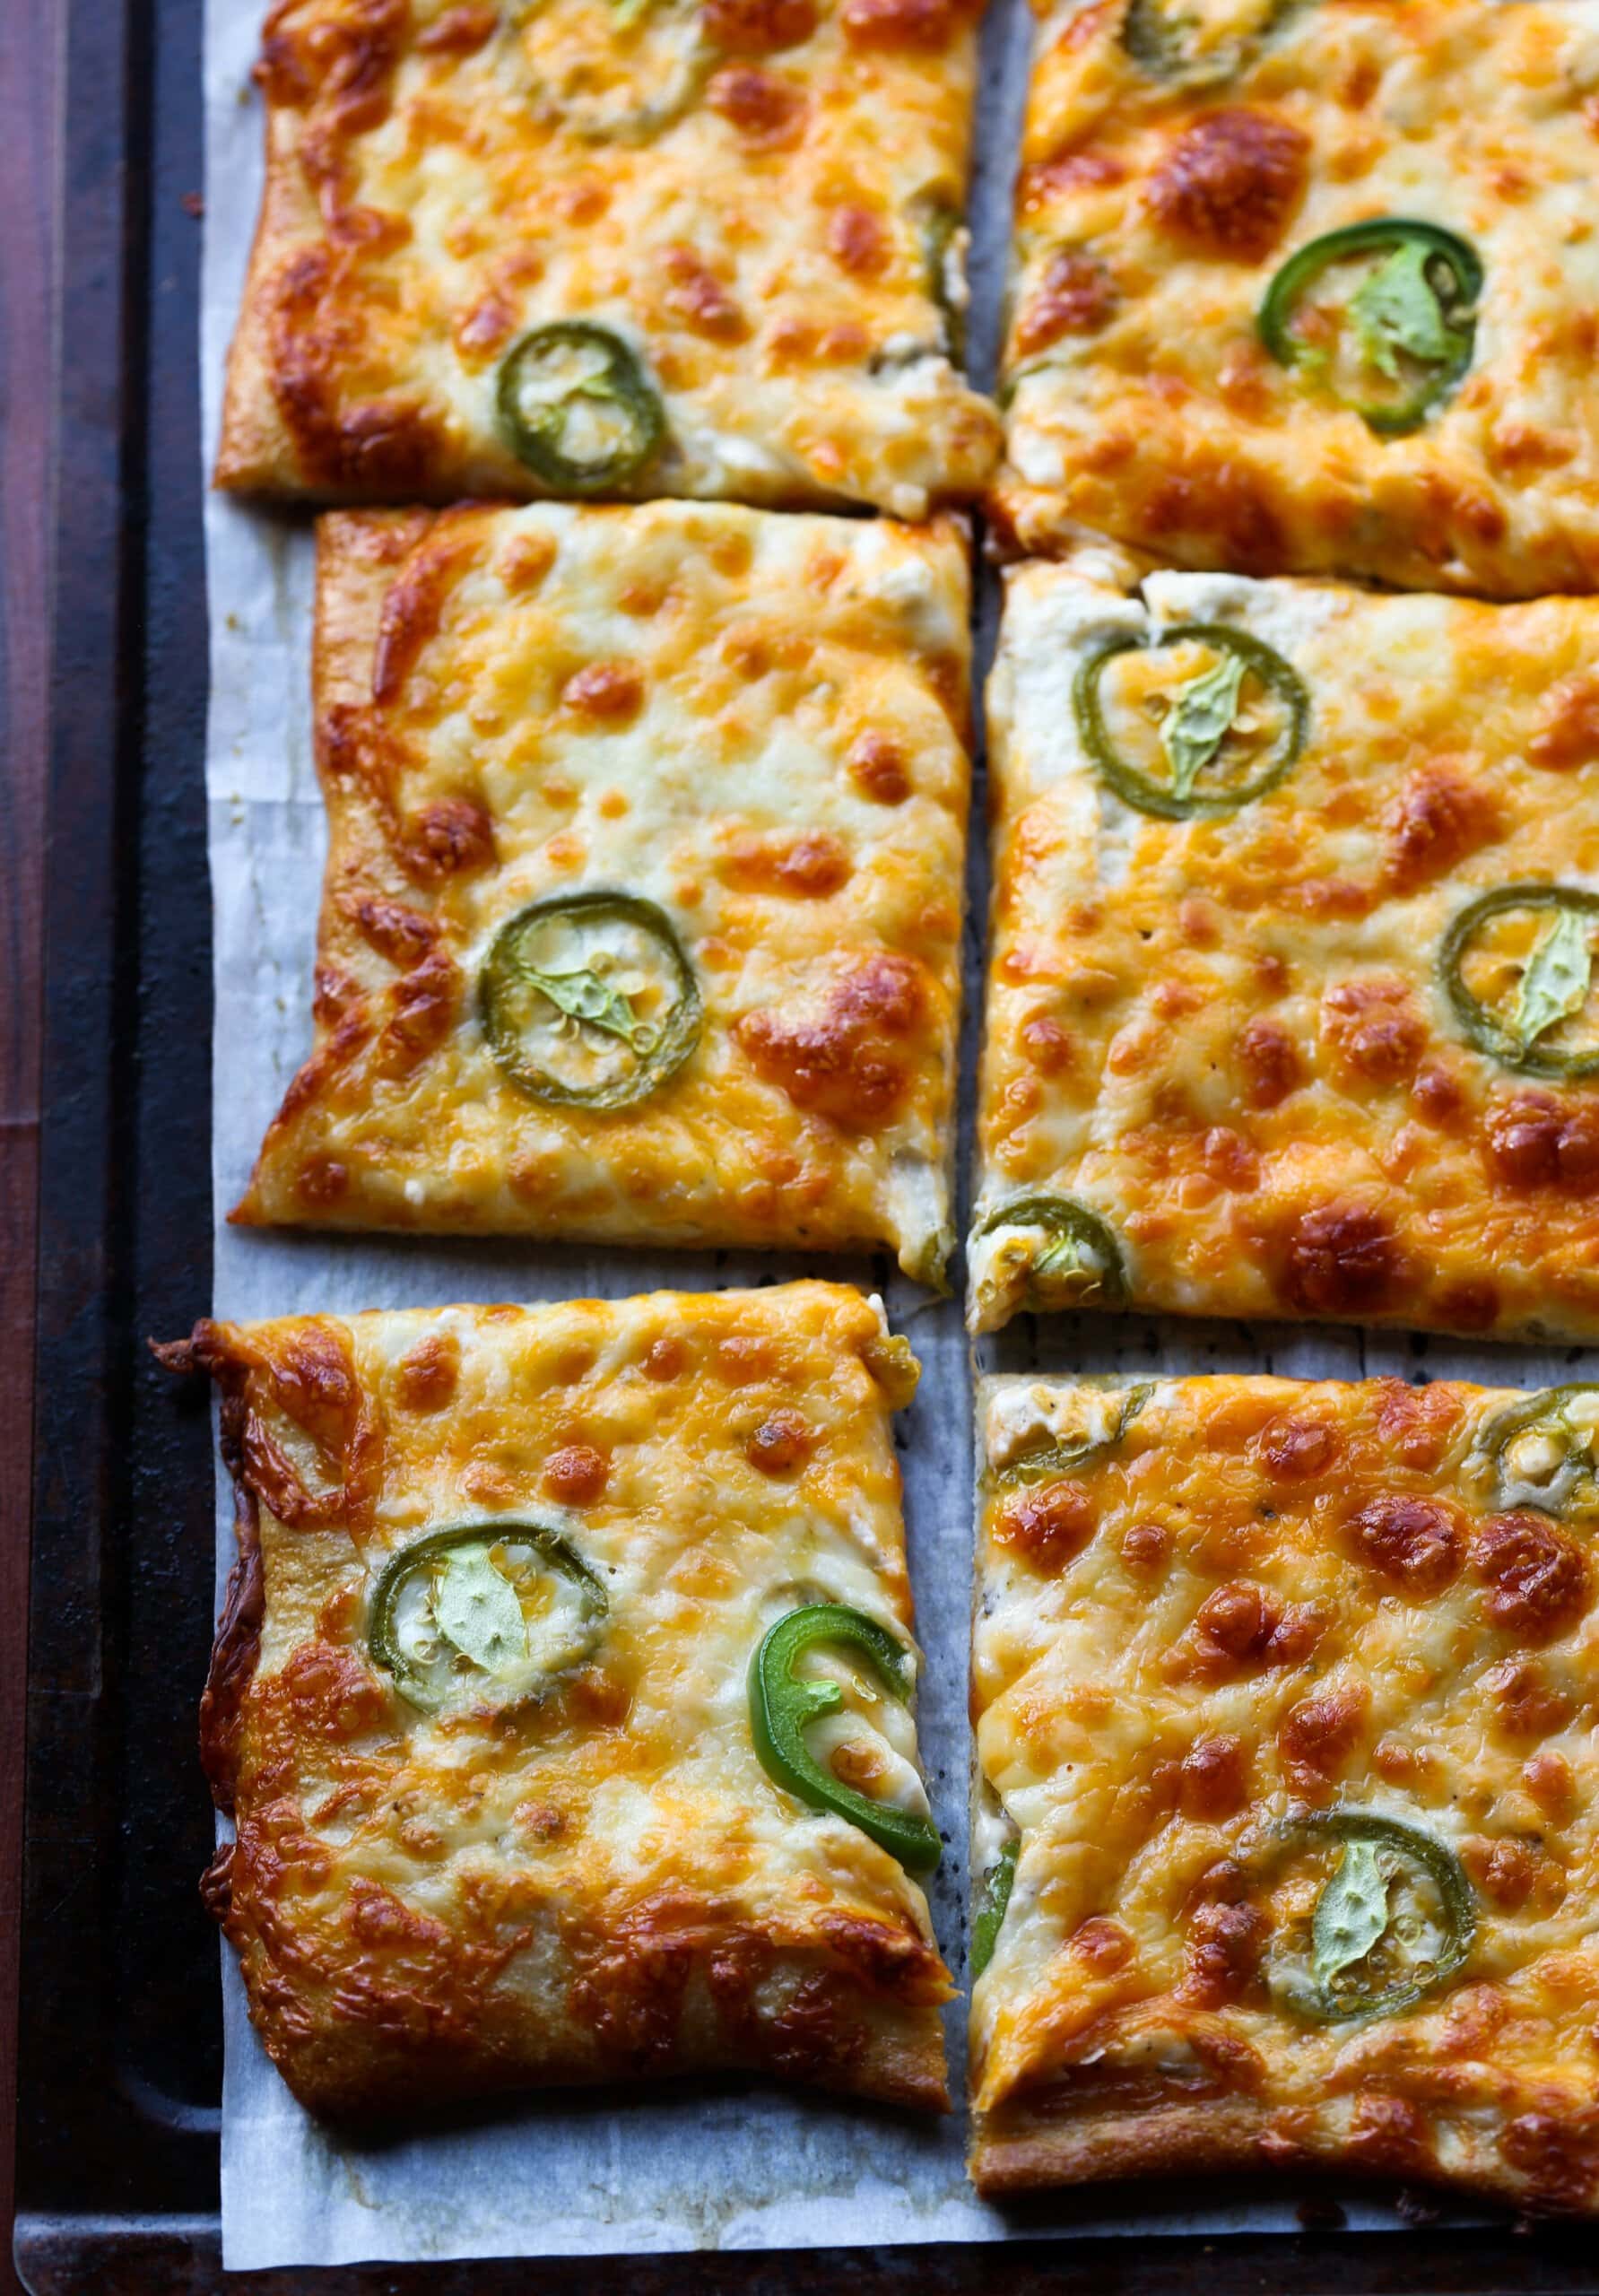 Pizza topped with jalapenos and cheese sliced on a tray